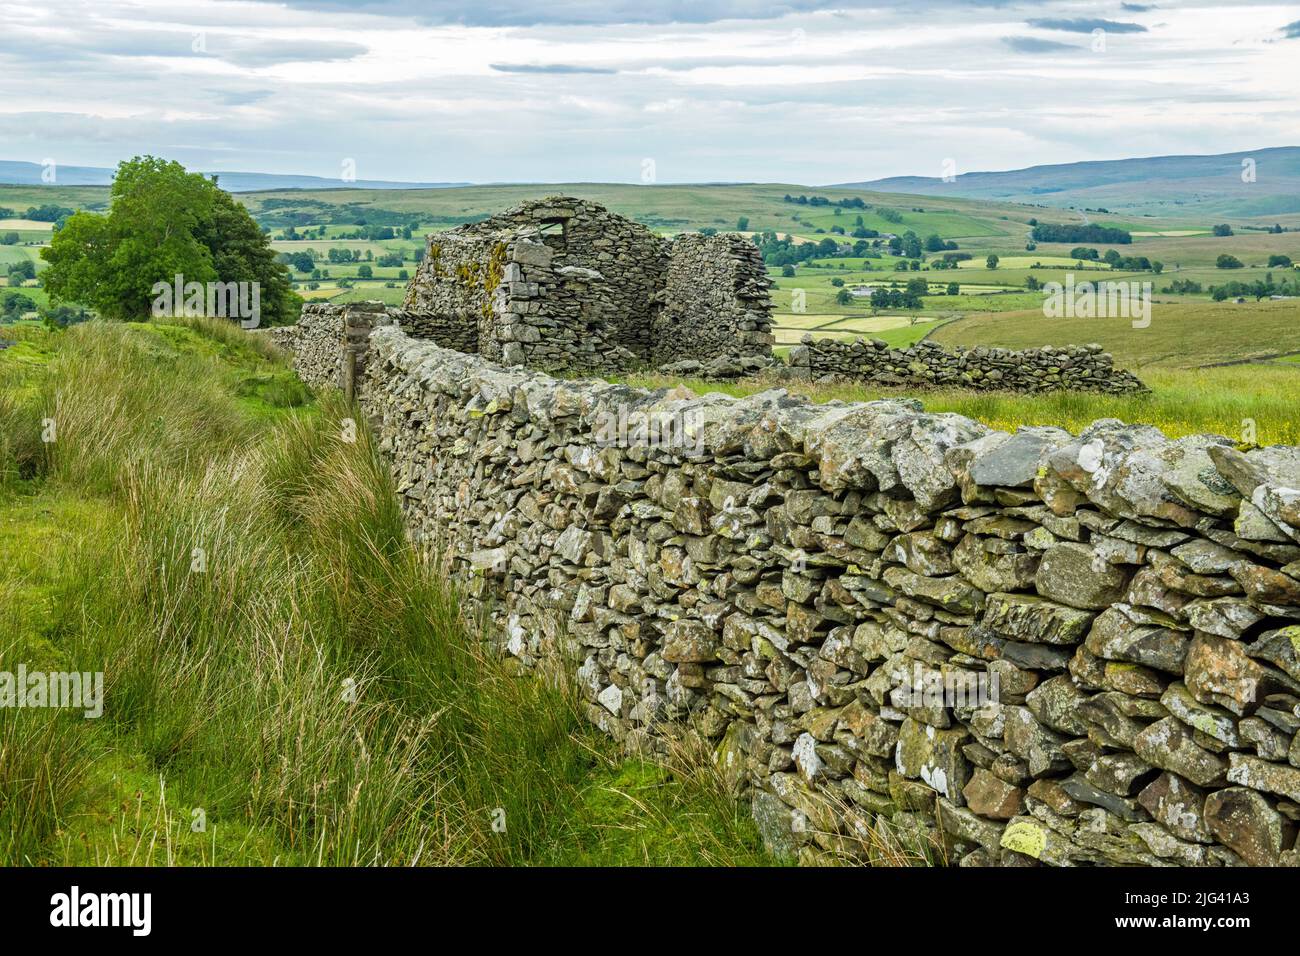 View from Artlegarth in Cumbria over the old barn and landscape photographed early July Stock Photo